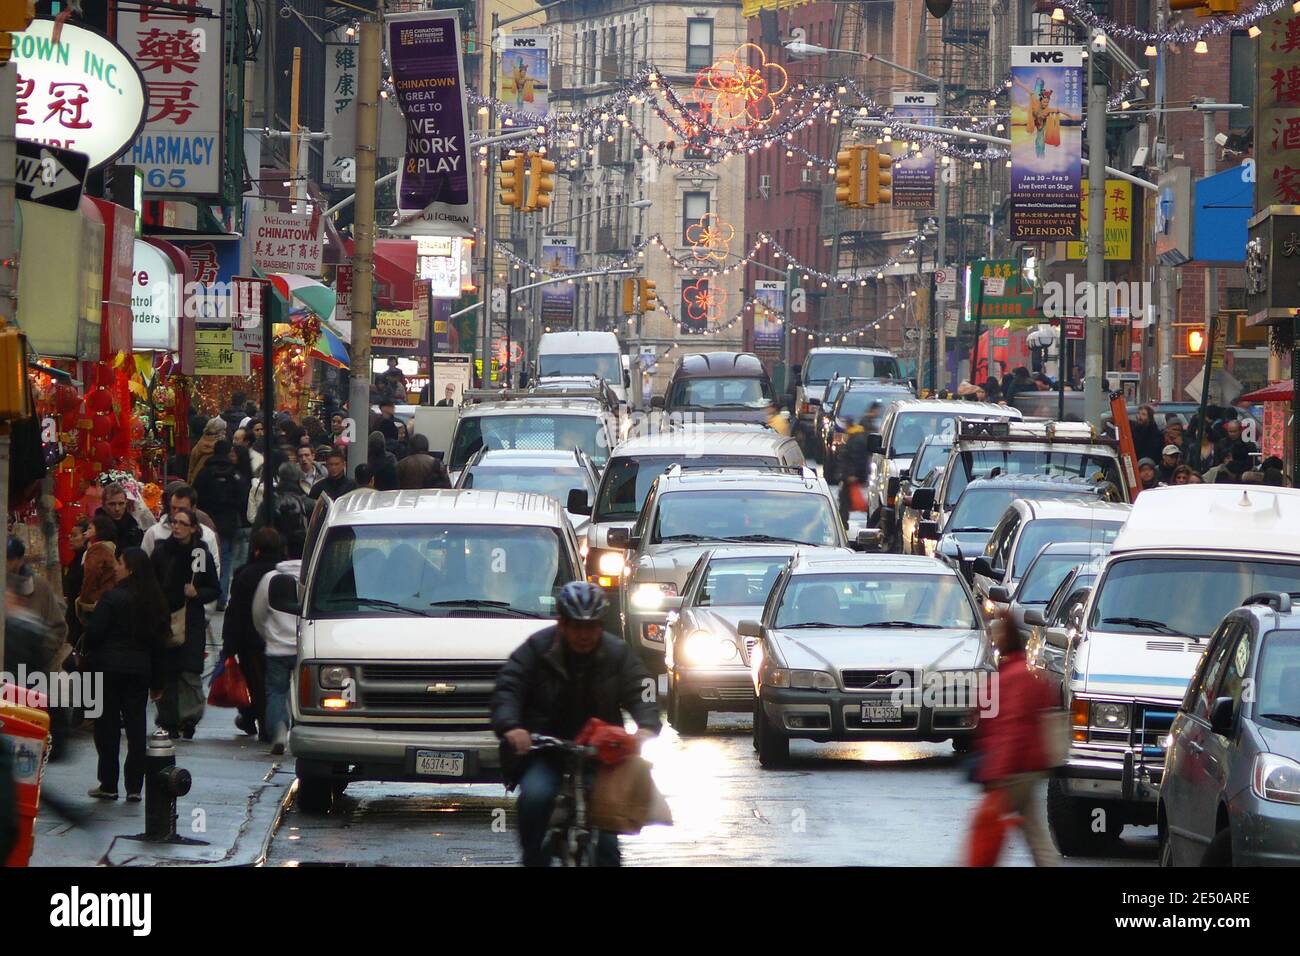 Shoppers and cars jam the colorful Chinatown district in New York City, New York on February 5, 2008. Stock Photo